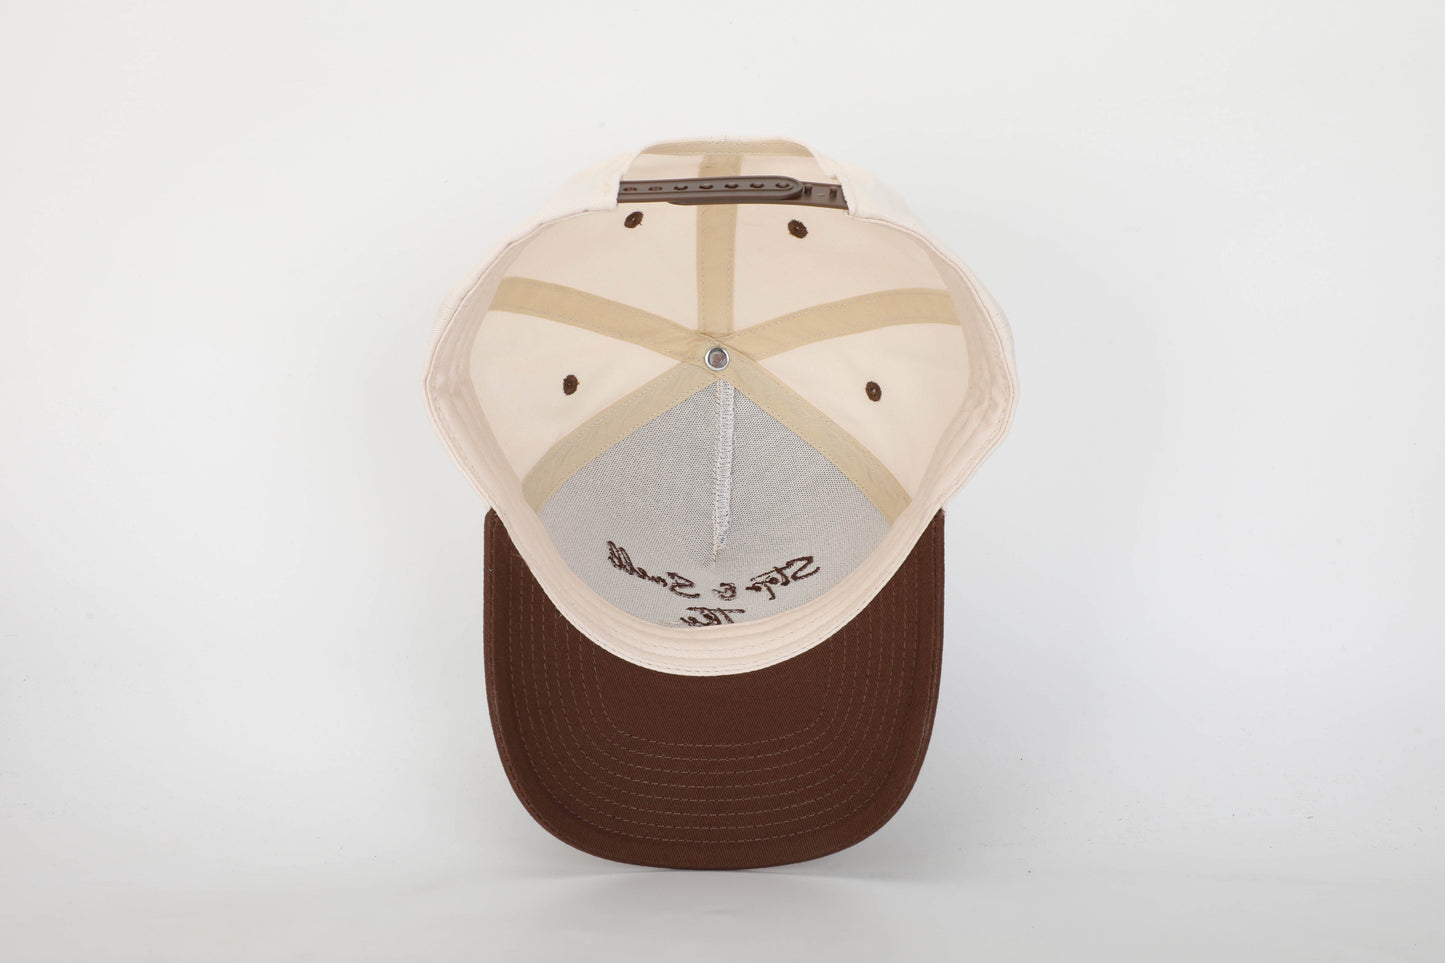 Stop & Smell The Roses Structured Hat Brown/Cream of